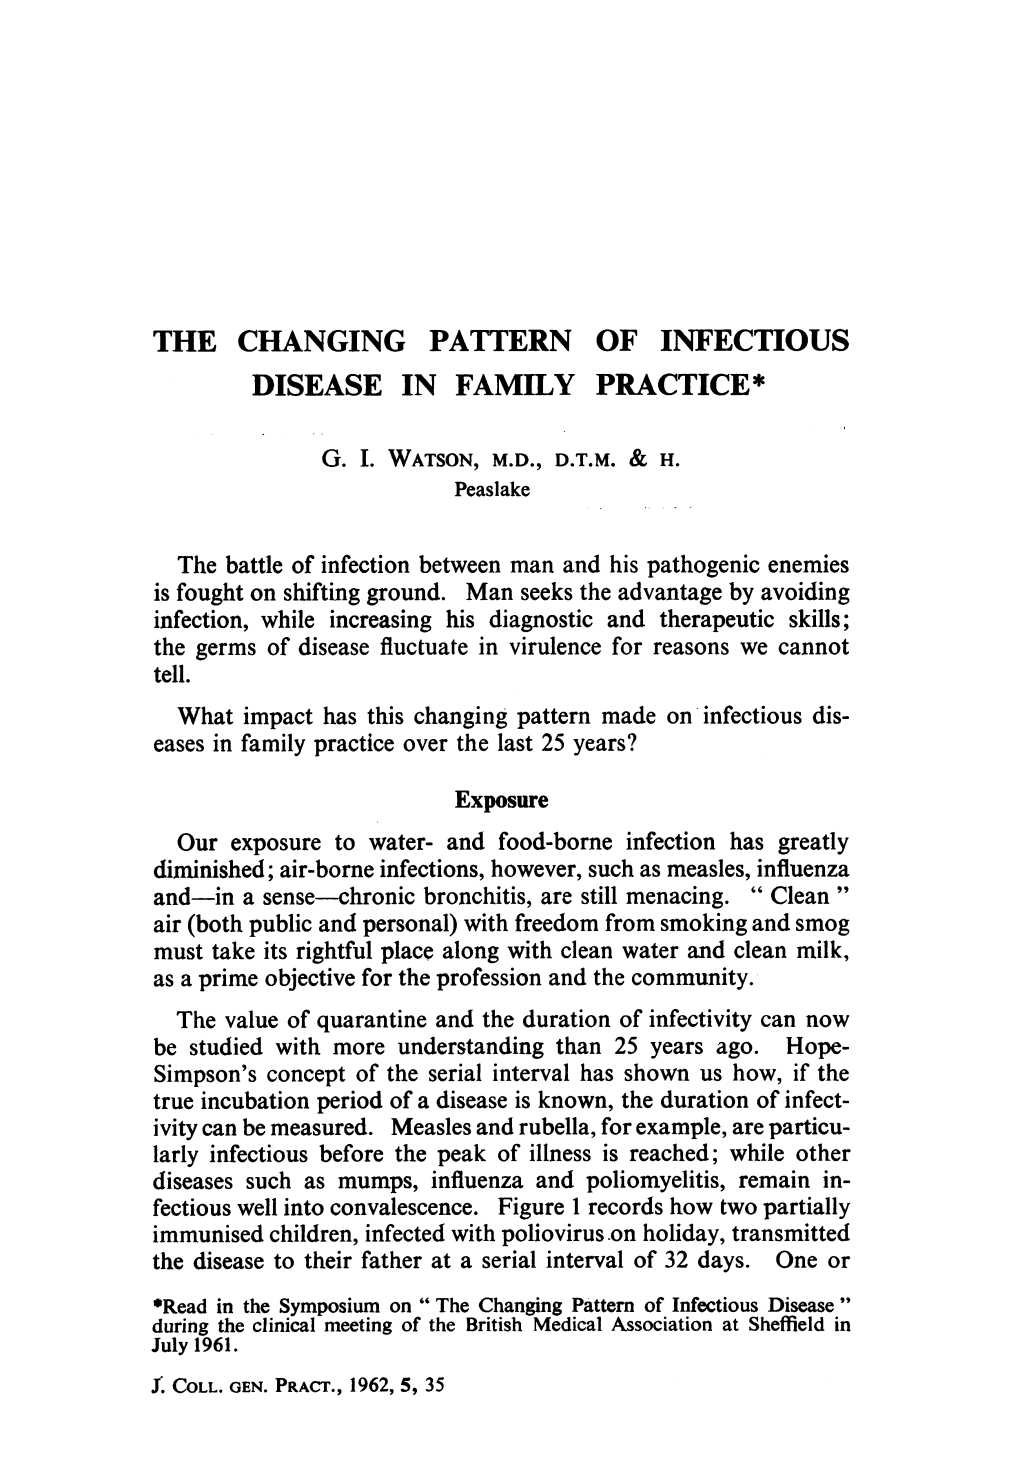 The Changing Pattern of Infectious Disease in Family Practice*